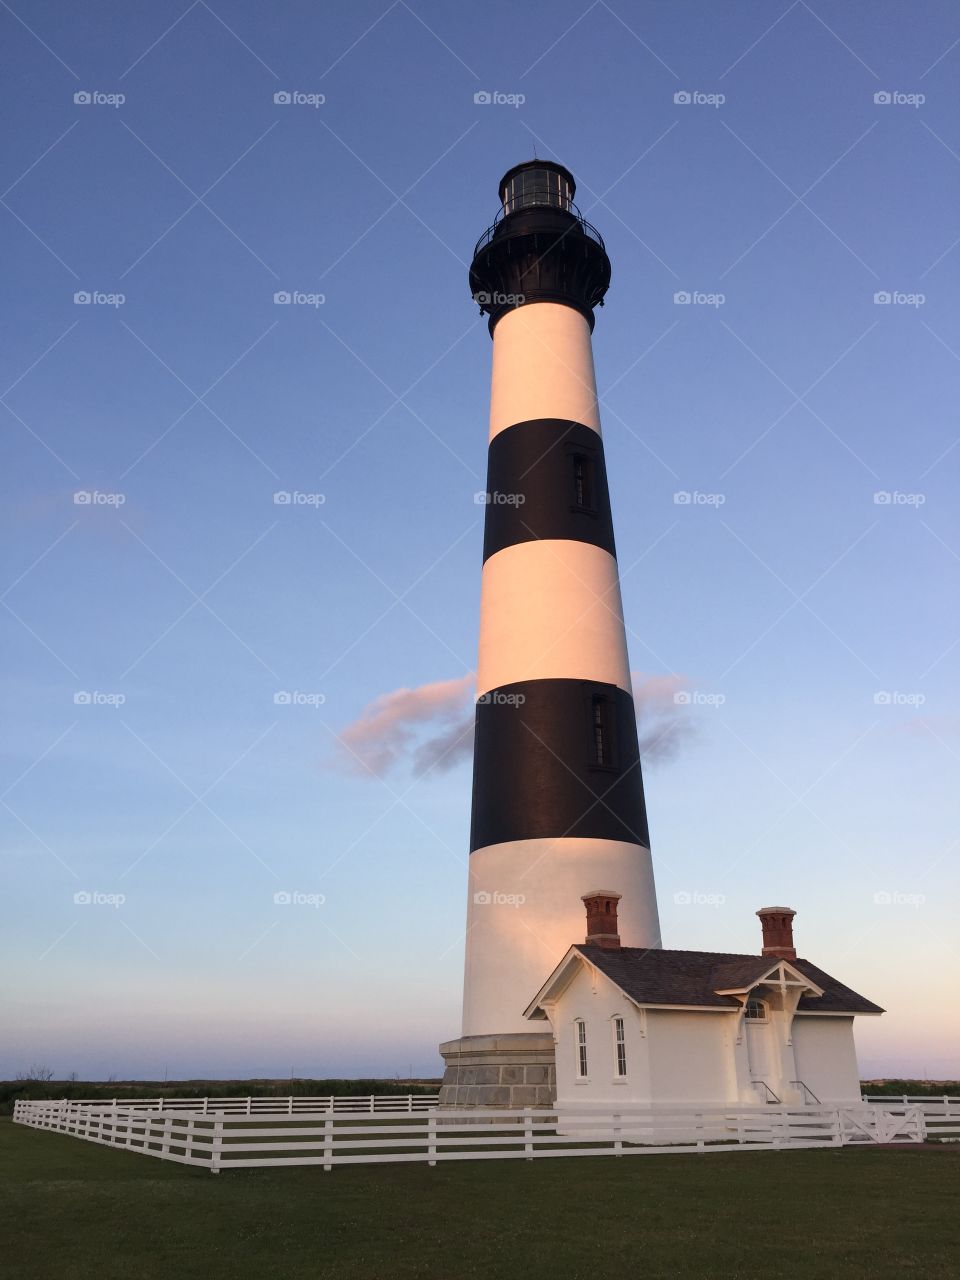 No Person, Lighthouse, Outdoors, Sky, Architecture